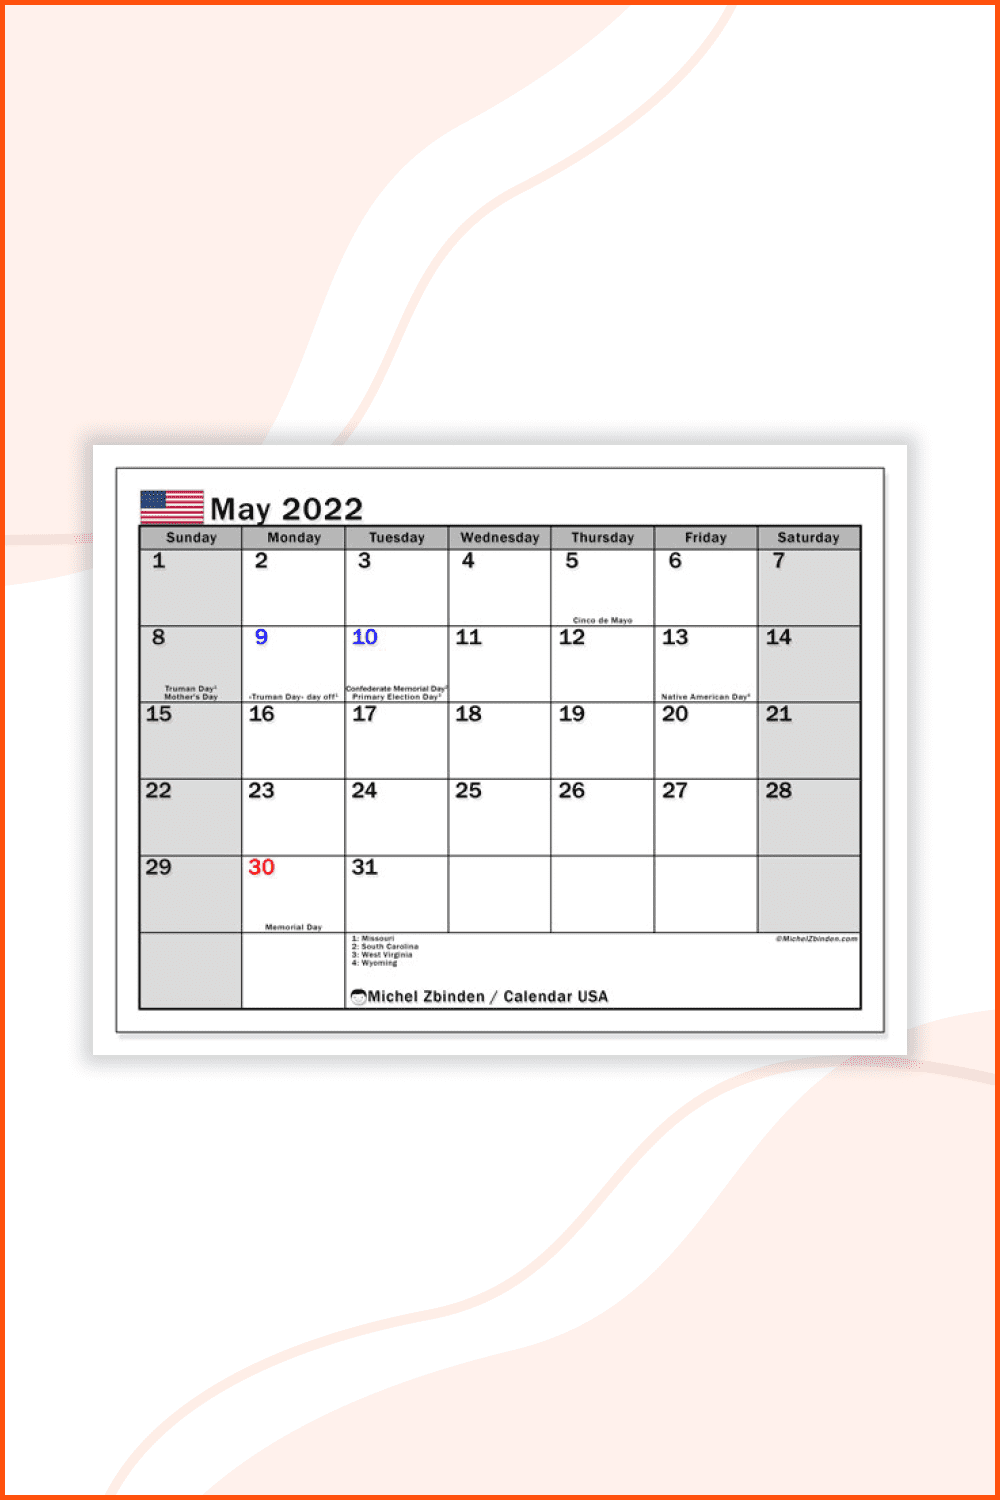 Monthly calendar and agenda May 2022.